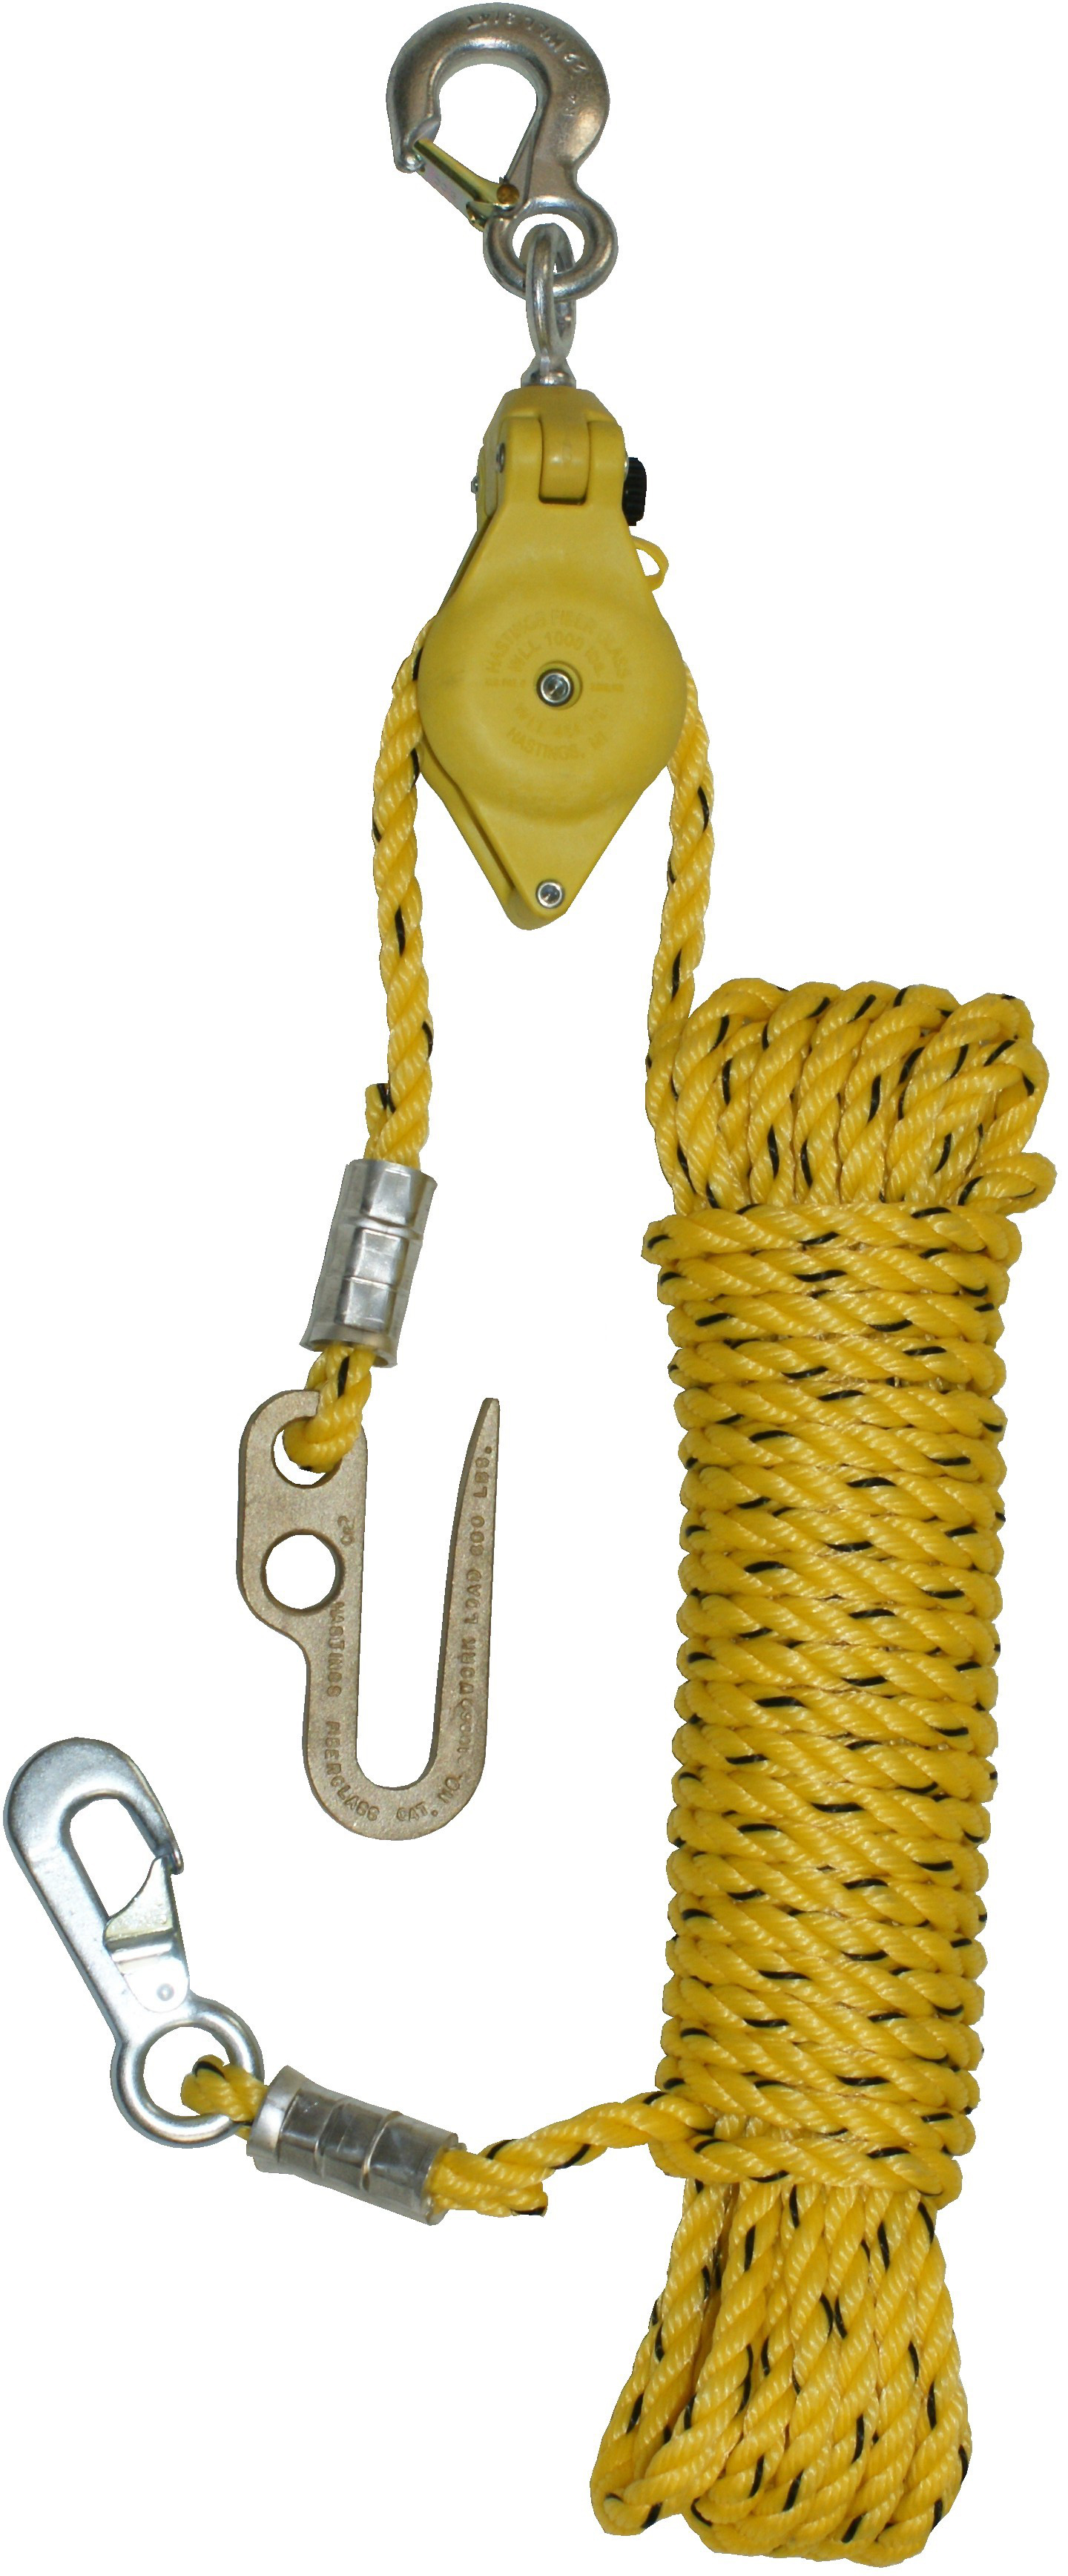 Hastings 3558-1 Complete Hand Line with 1/2 Polypropylene Rope - Western  Safety